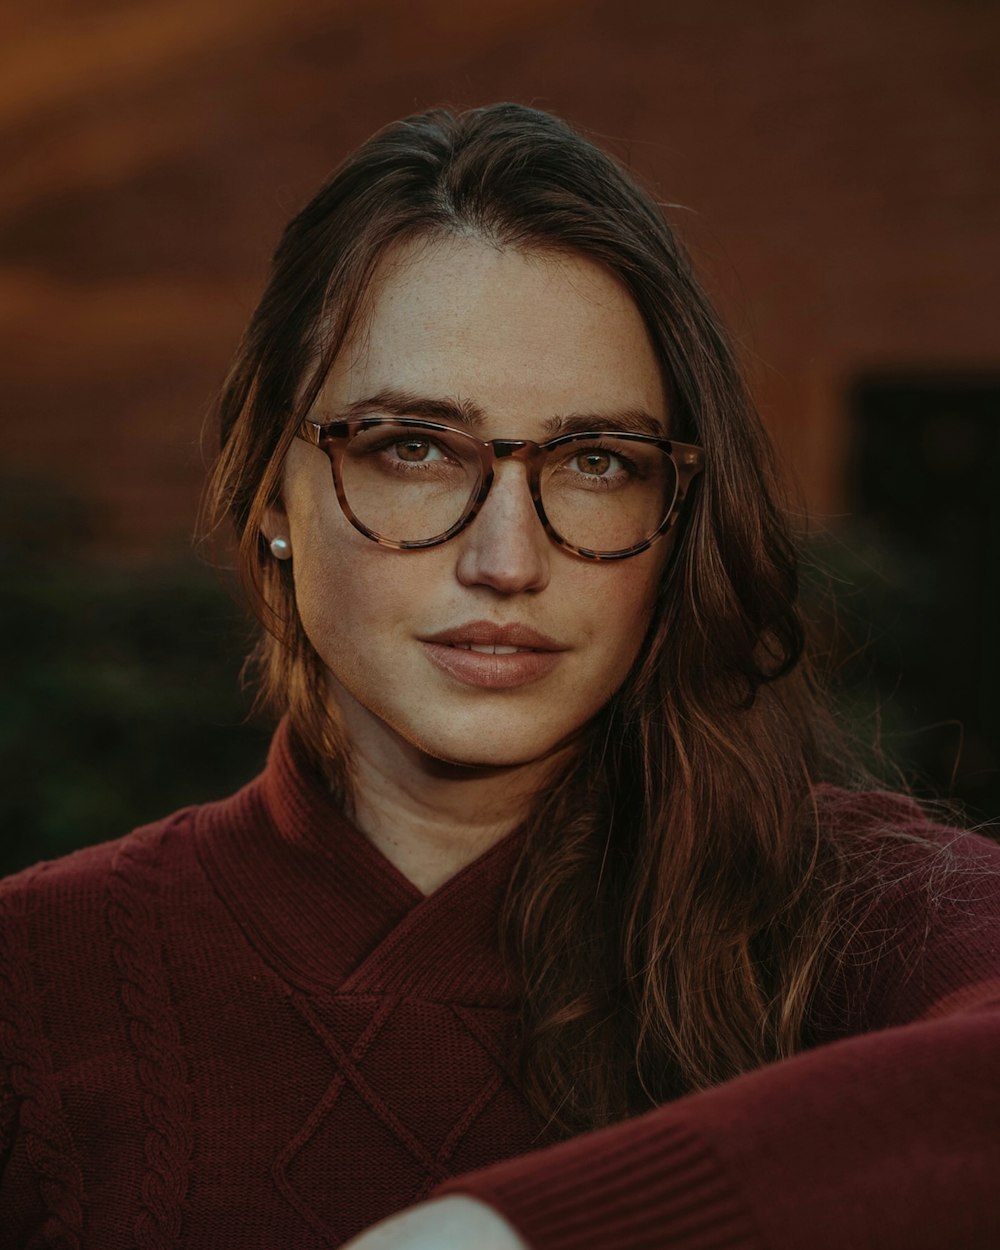 a person in glasses looking at the camera